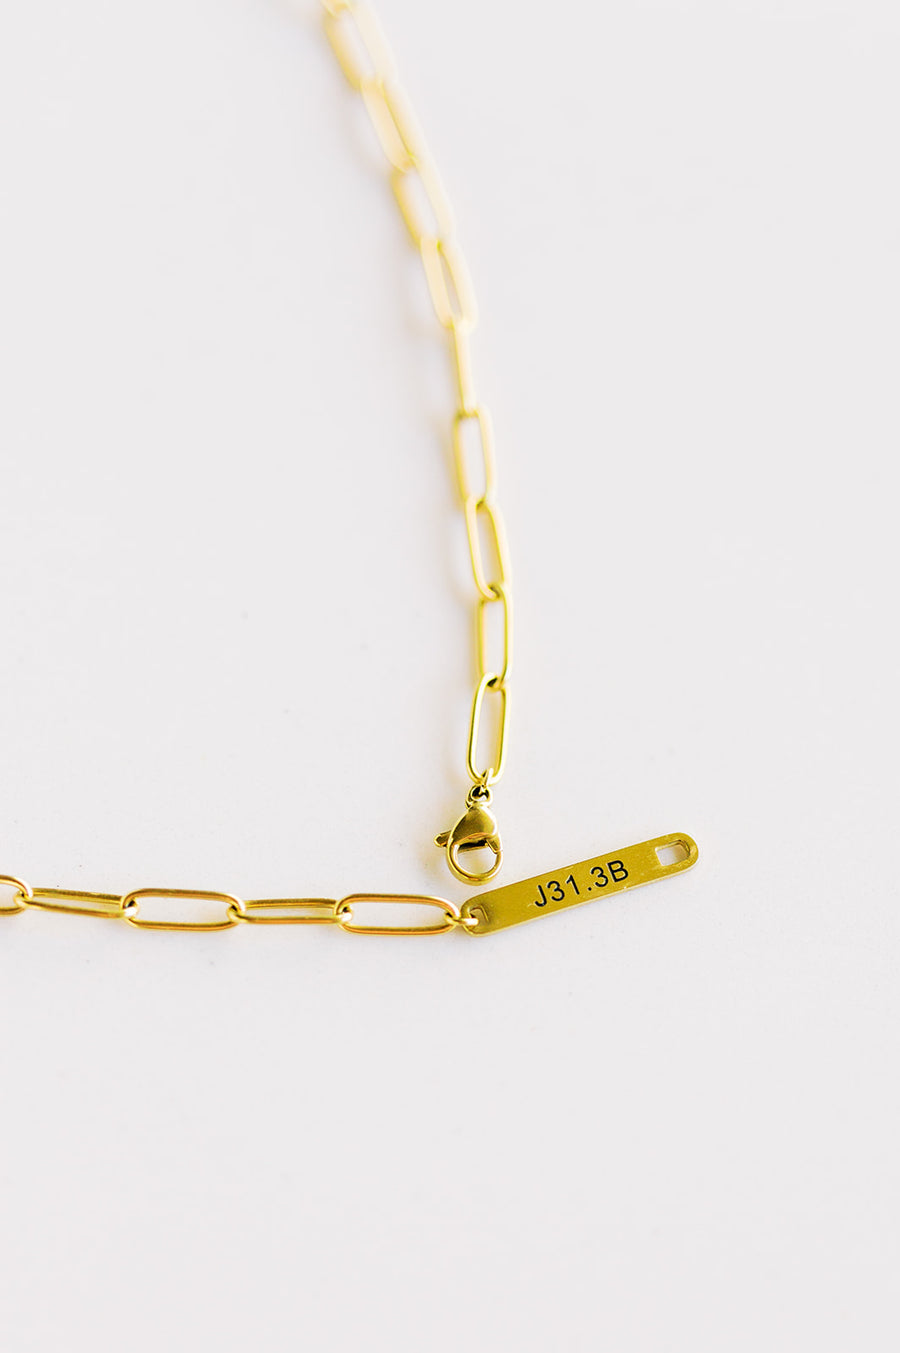 Jeremiah 31:3b Paperclip Necklace (10% off!)